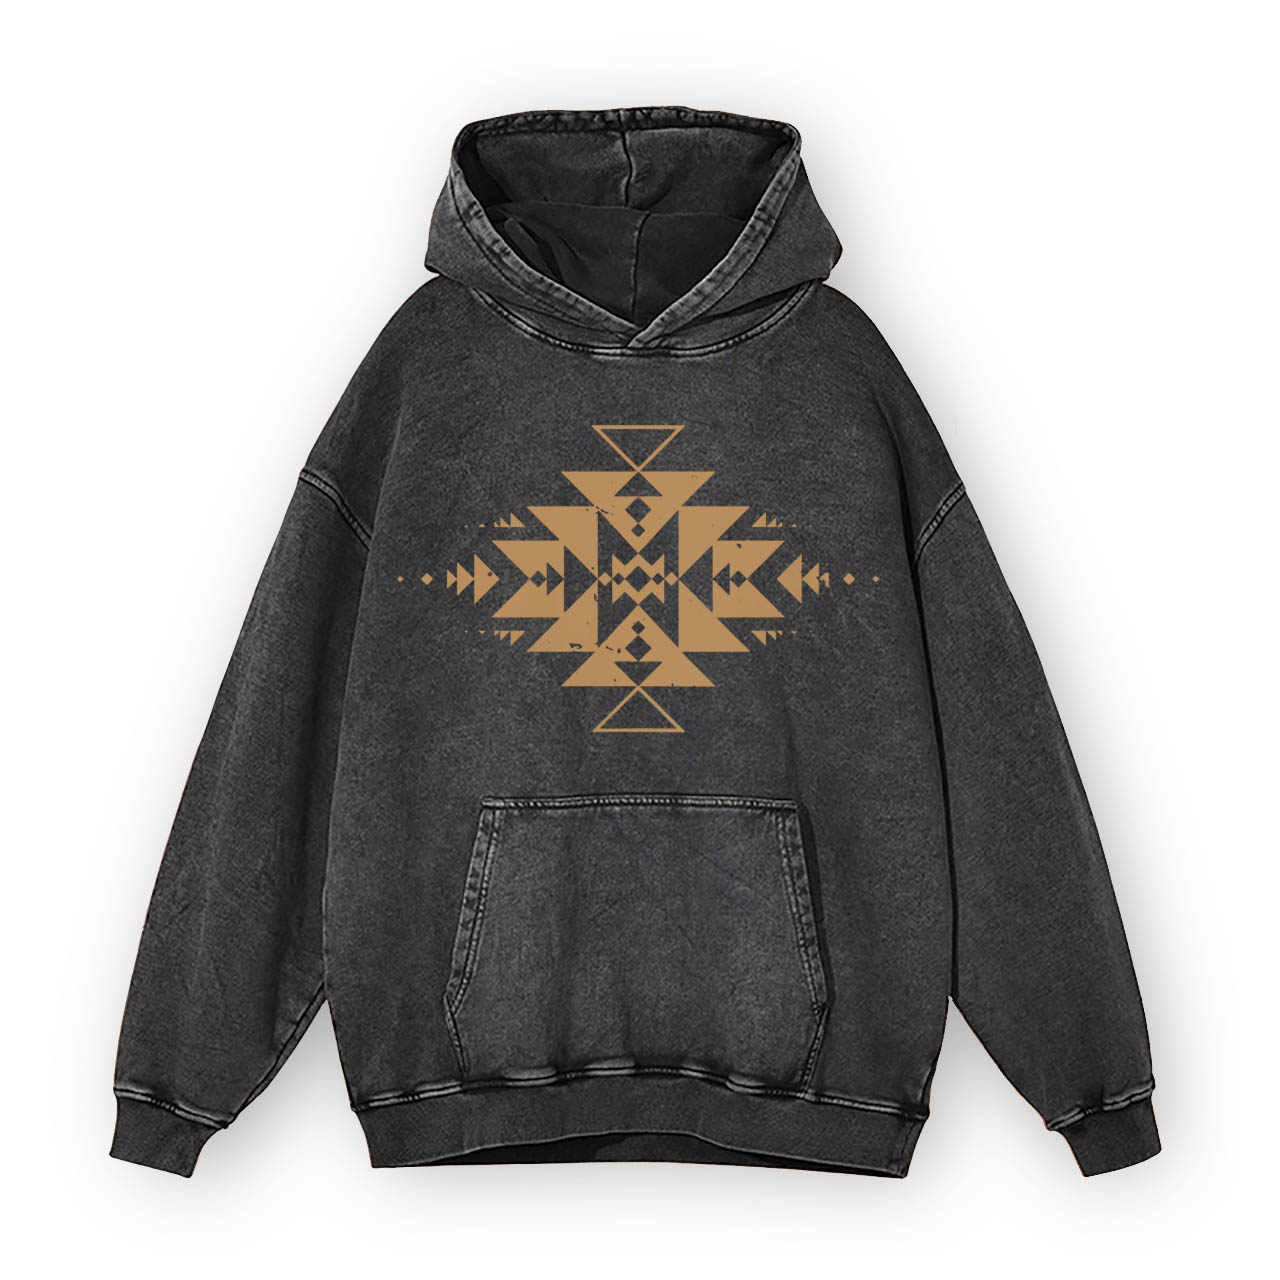 The Mysterious Power of the Aztec West Hoodies